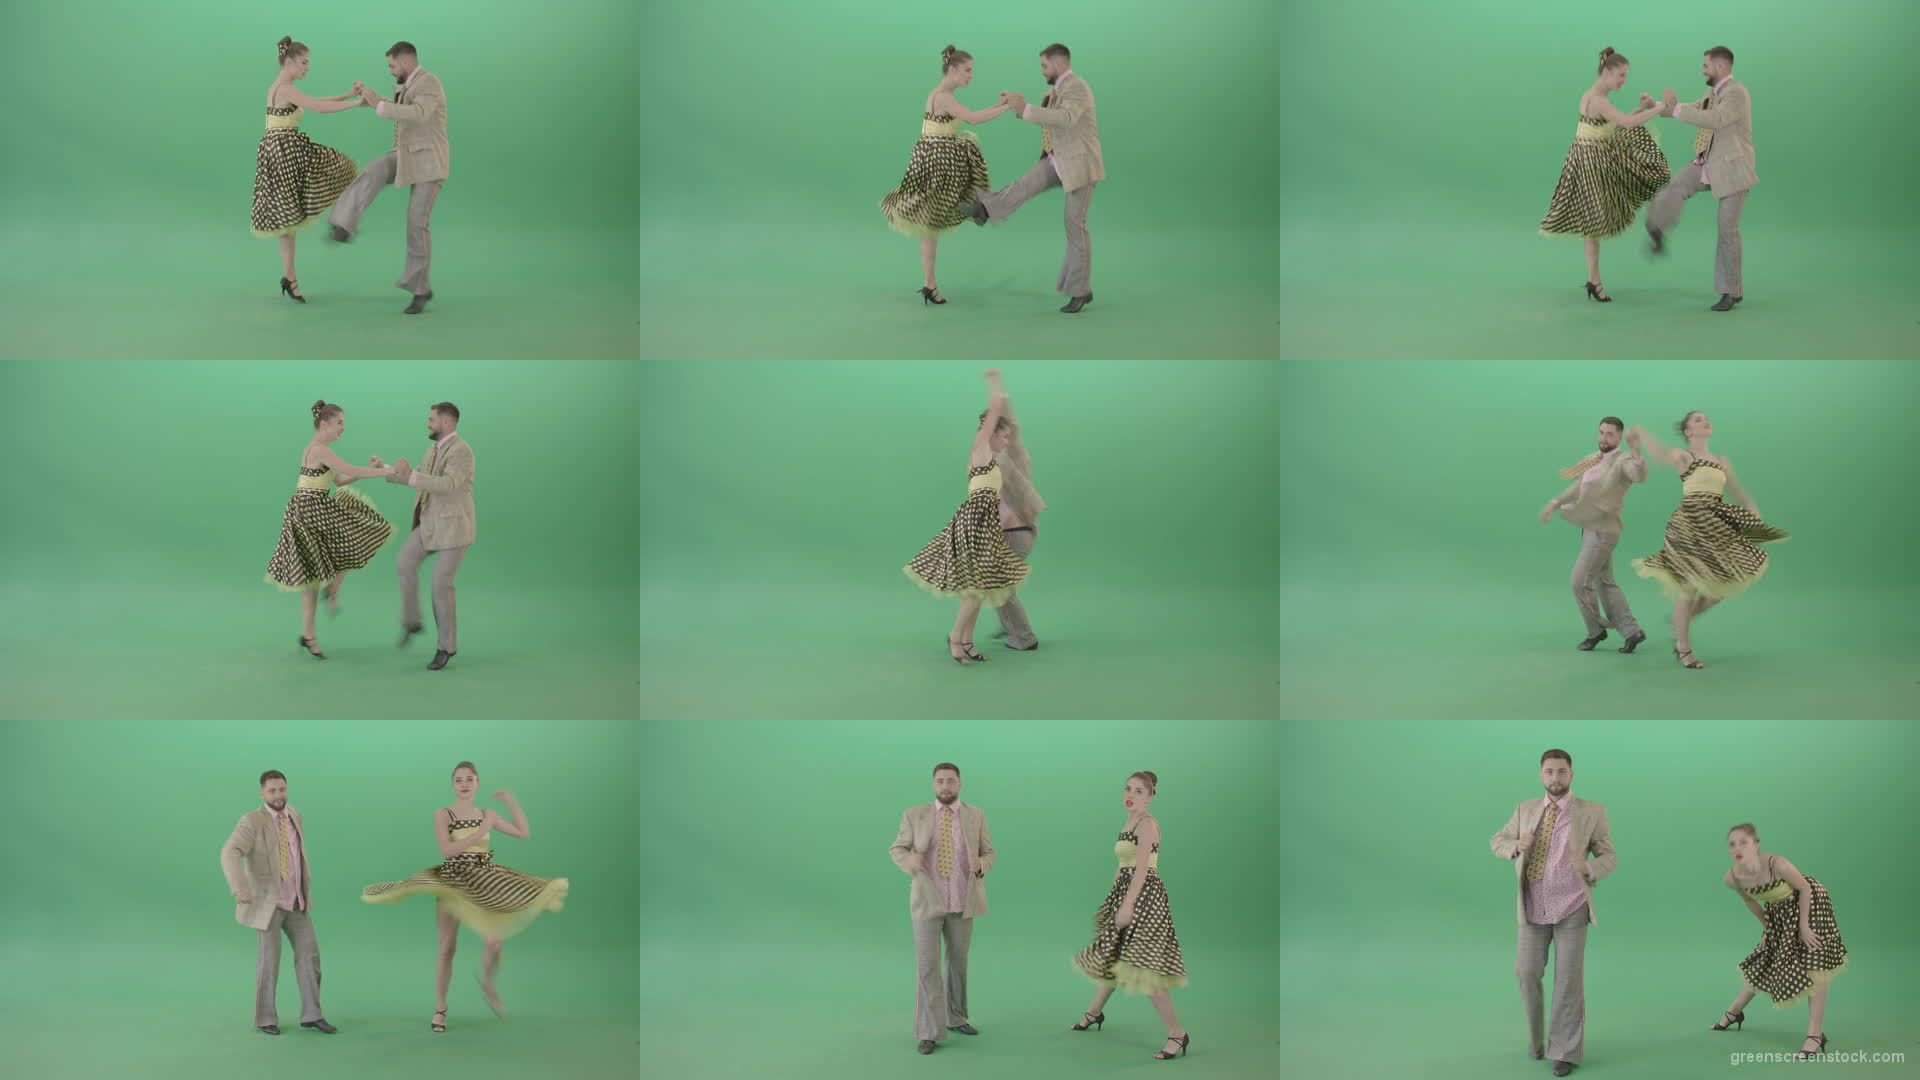 Lovely-couple-jumping-in-Boogie-woogie-dance-isolated-on-Green-Screen-4K-Video-Stock-Footage-1920 Green Screen Stock